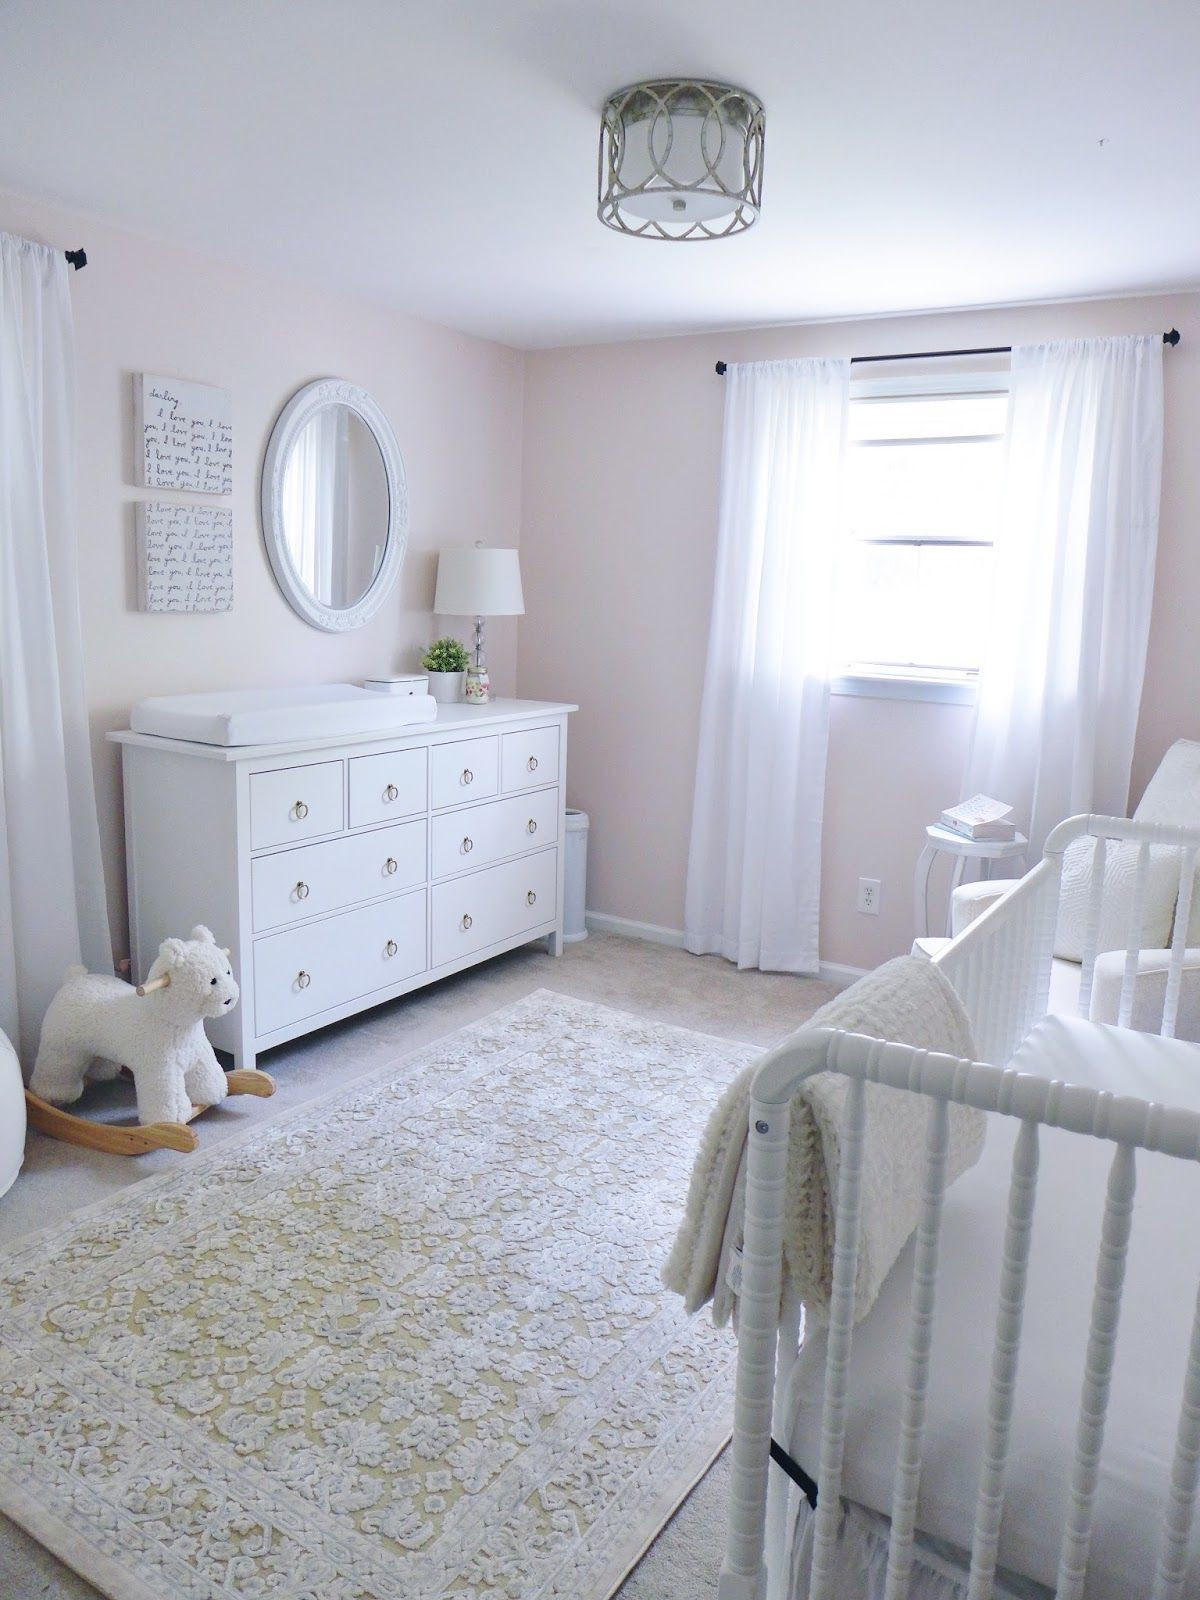 White Dressers For Baby Room
 You are never too young to live in style Shop Kids